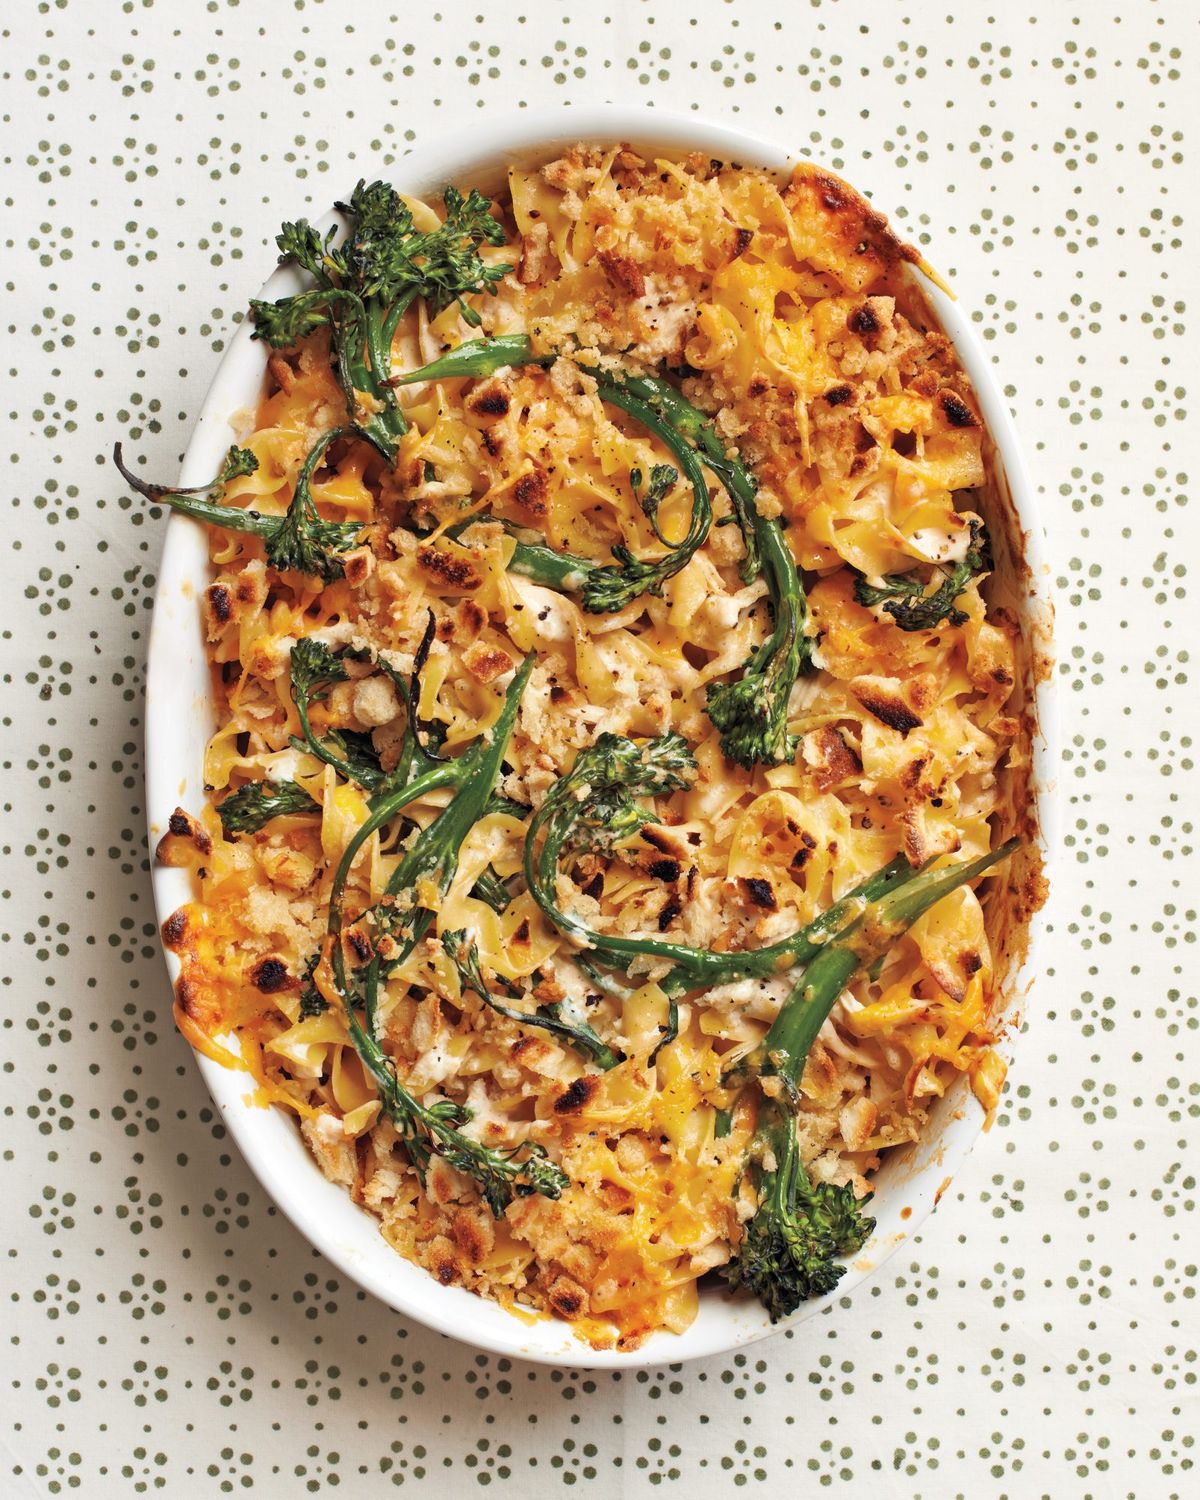 Chicken-and-Broccolini Mac in sir